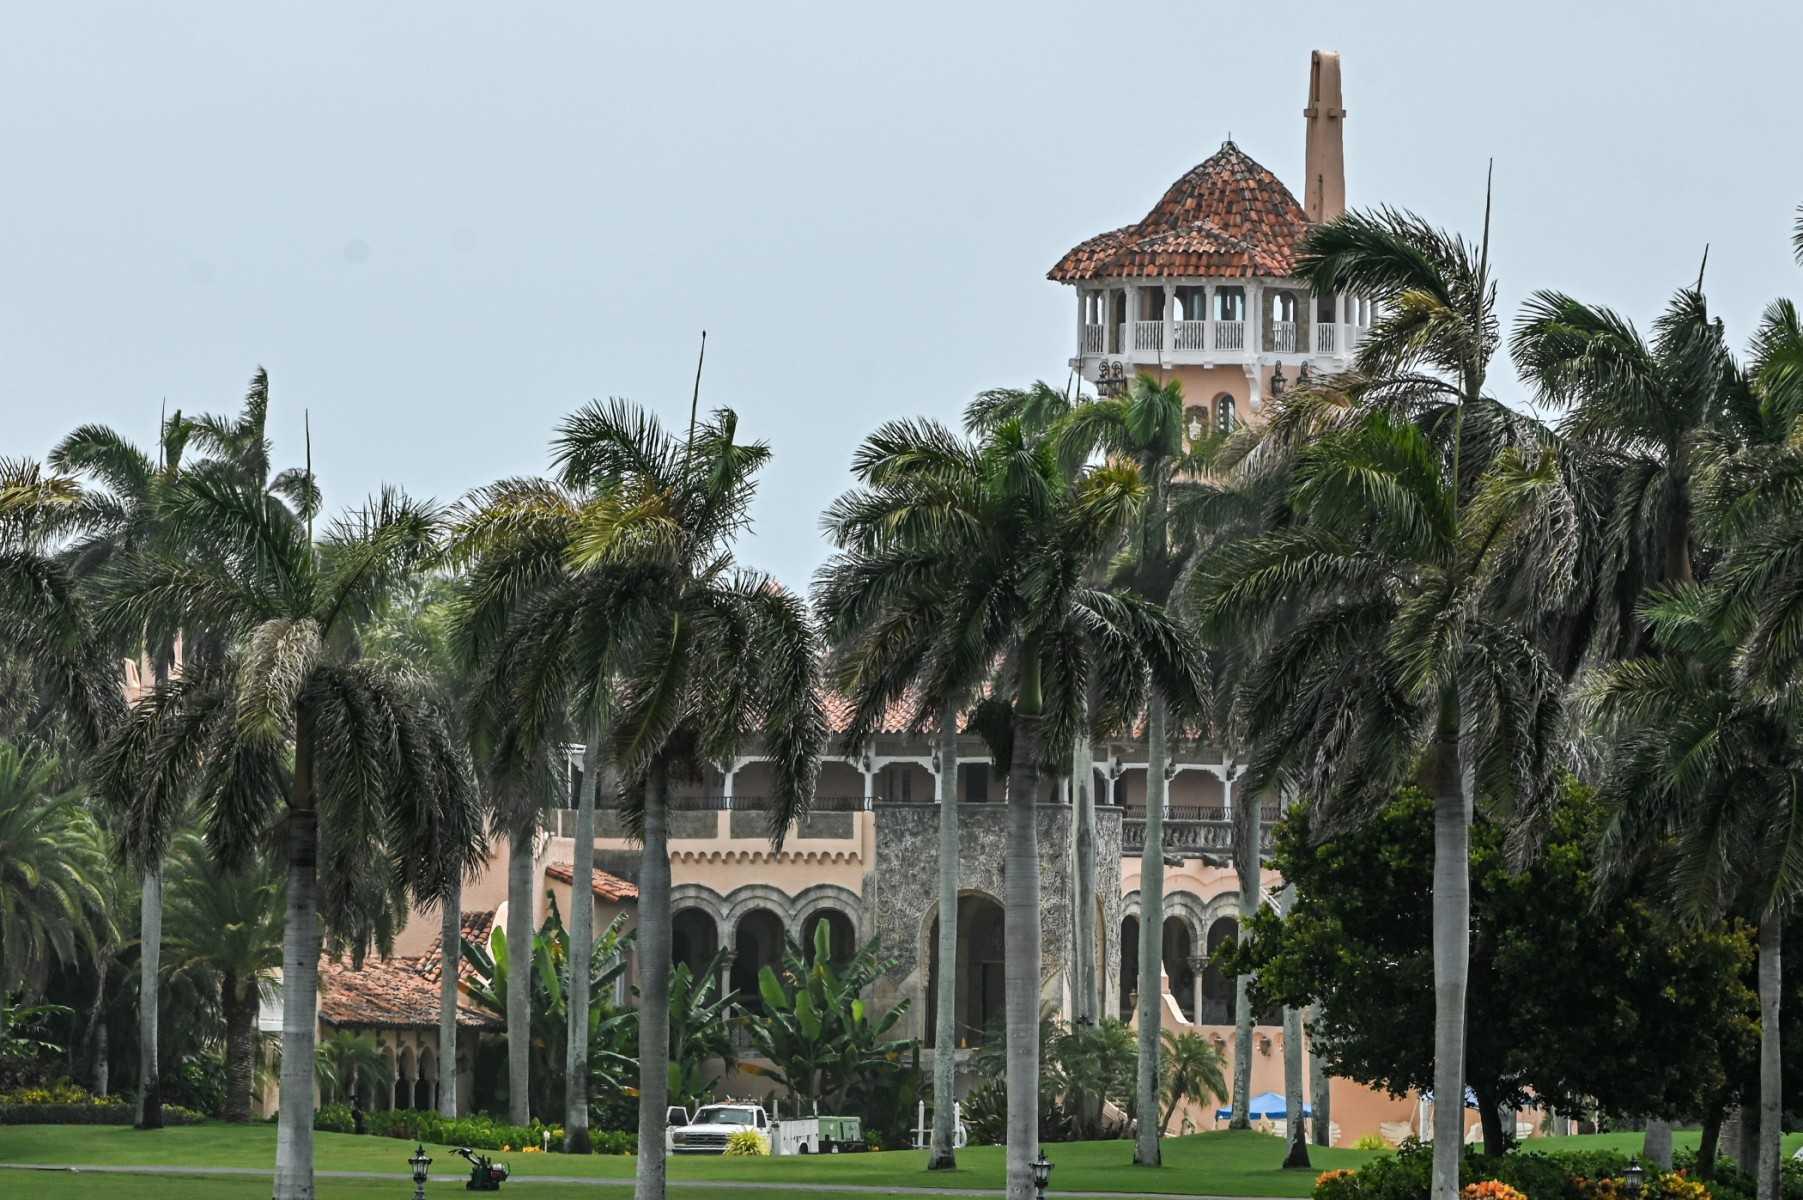 The residence of former US president Donald Trump at Mar-A-Lago in Palm Beach, Florida, on Aug 9. Trump said on Aug 8 that his Mar-A-Lago residence in Florida was being 'raided' by FBI agents in what he called an act of 'prosecutorial misconduct'. Photo: AFP